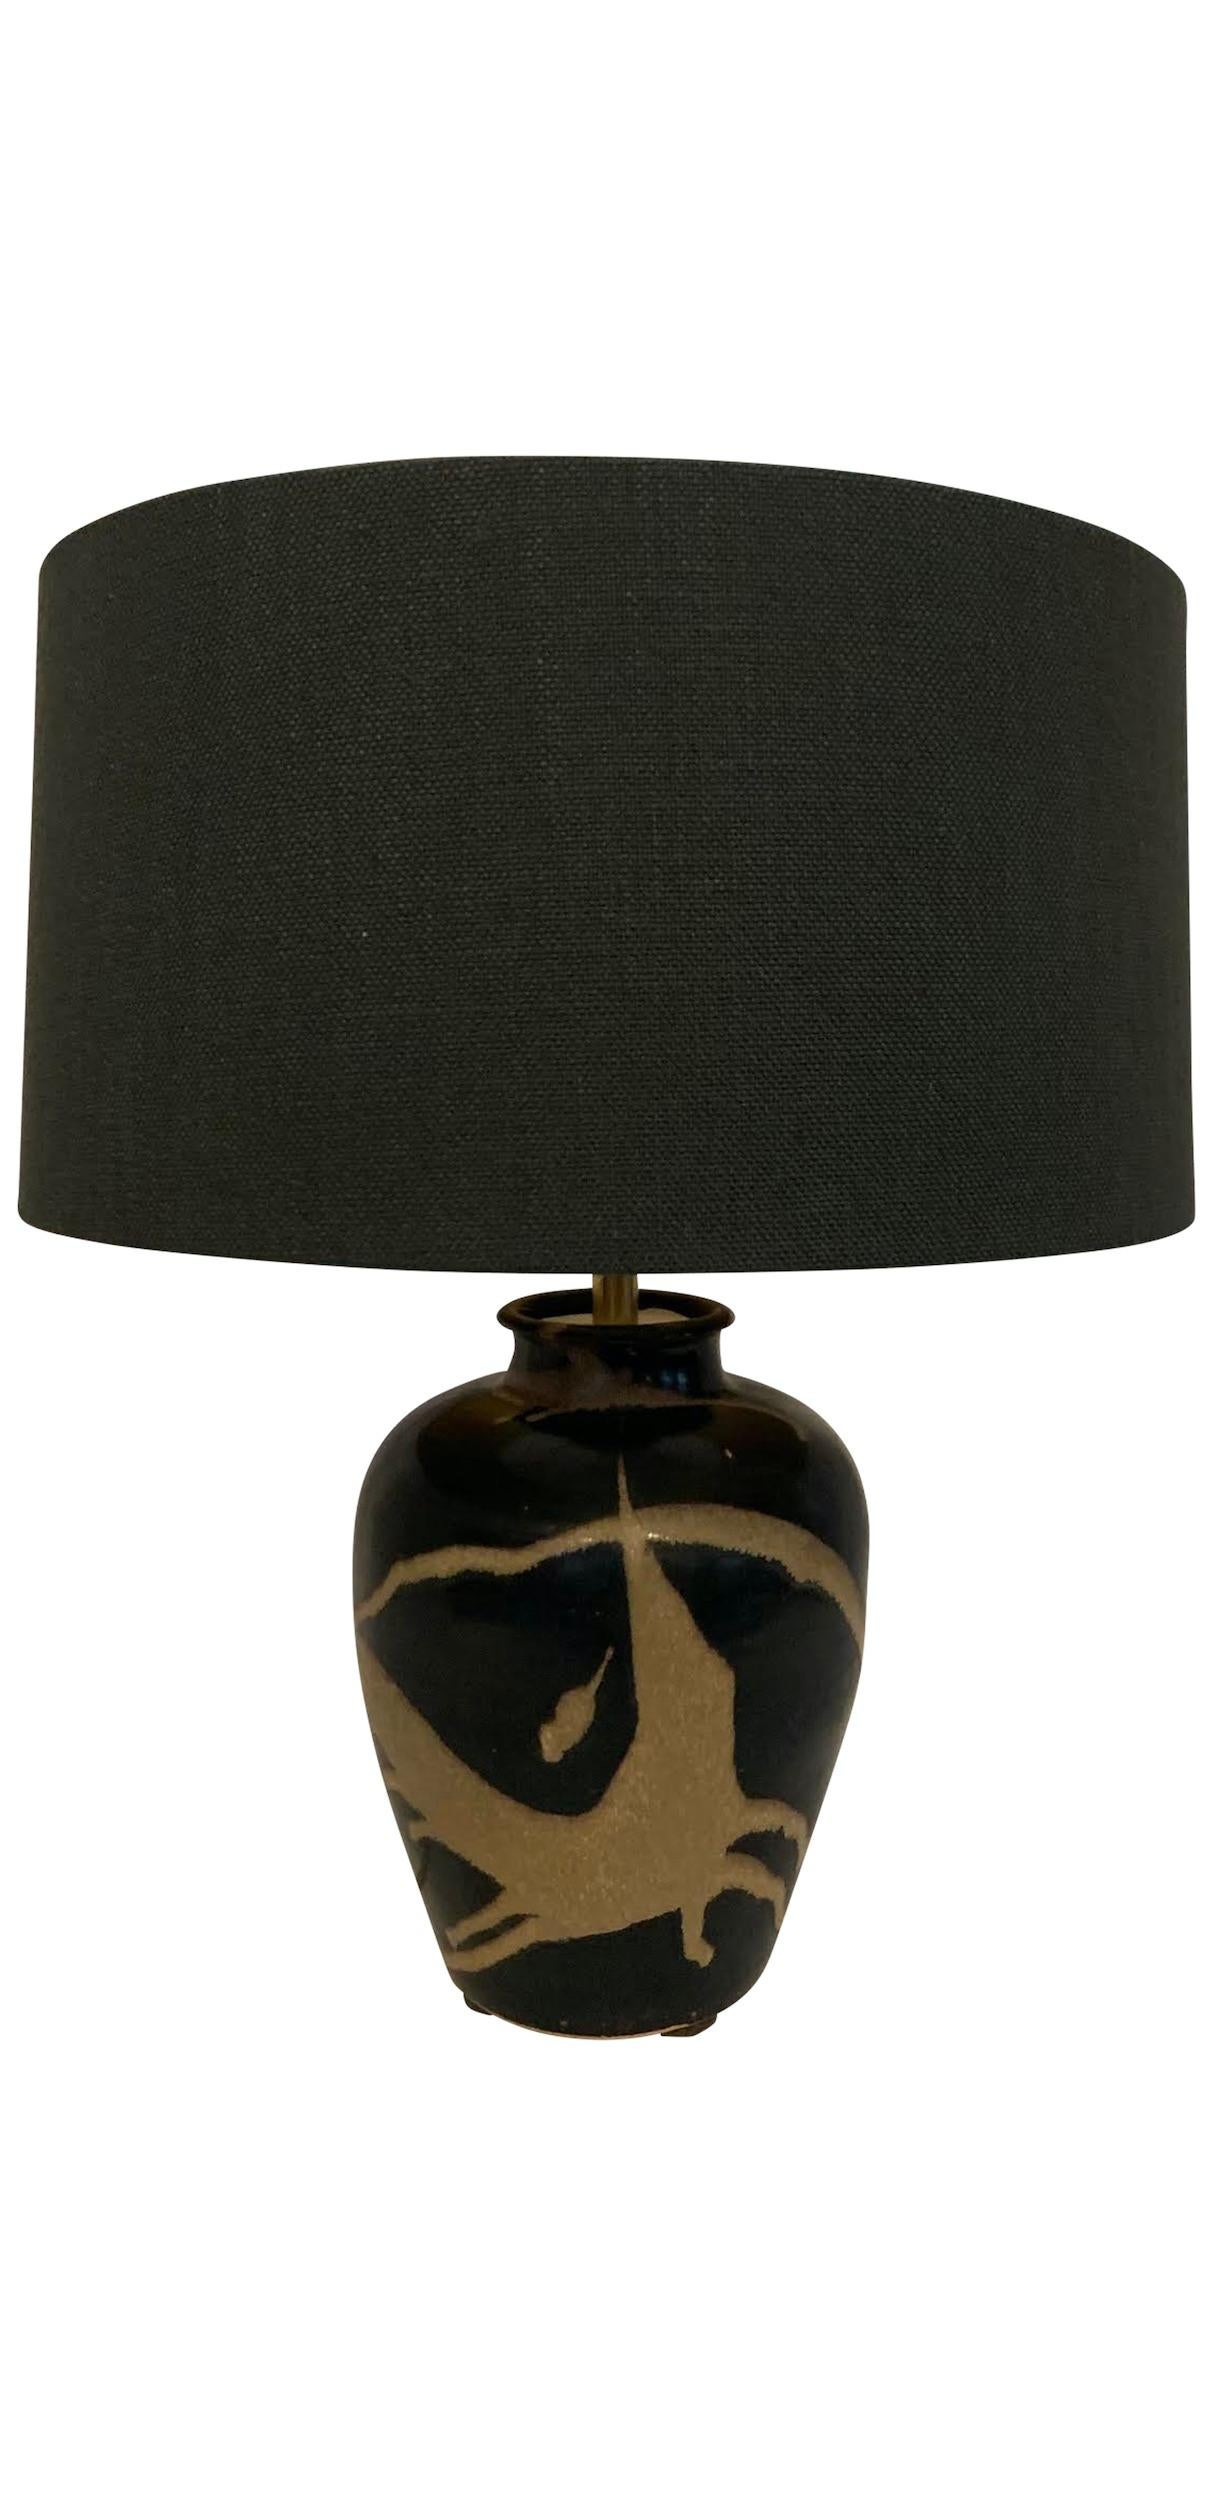 Contemporary Chinese pair of black ground lamps with abstract sand colored pattern design.
New black linen shades.
Base measures 7